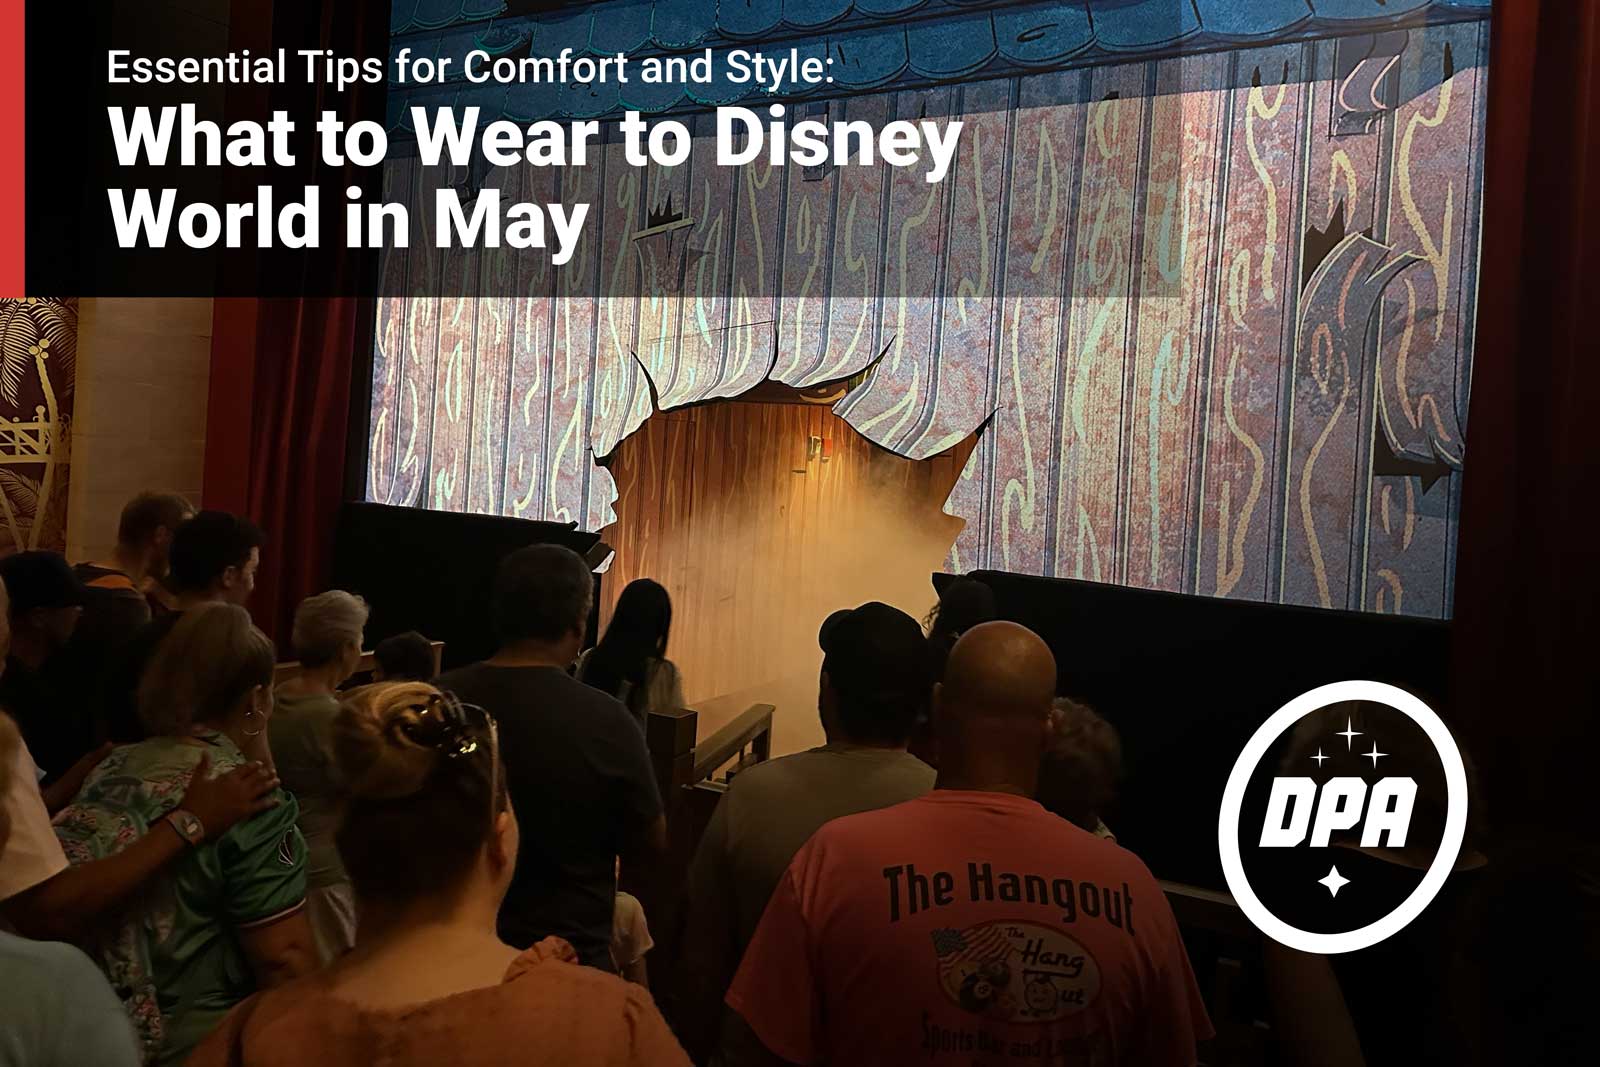 What to Wear to Disney World in May